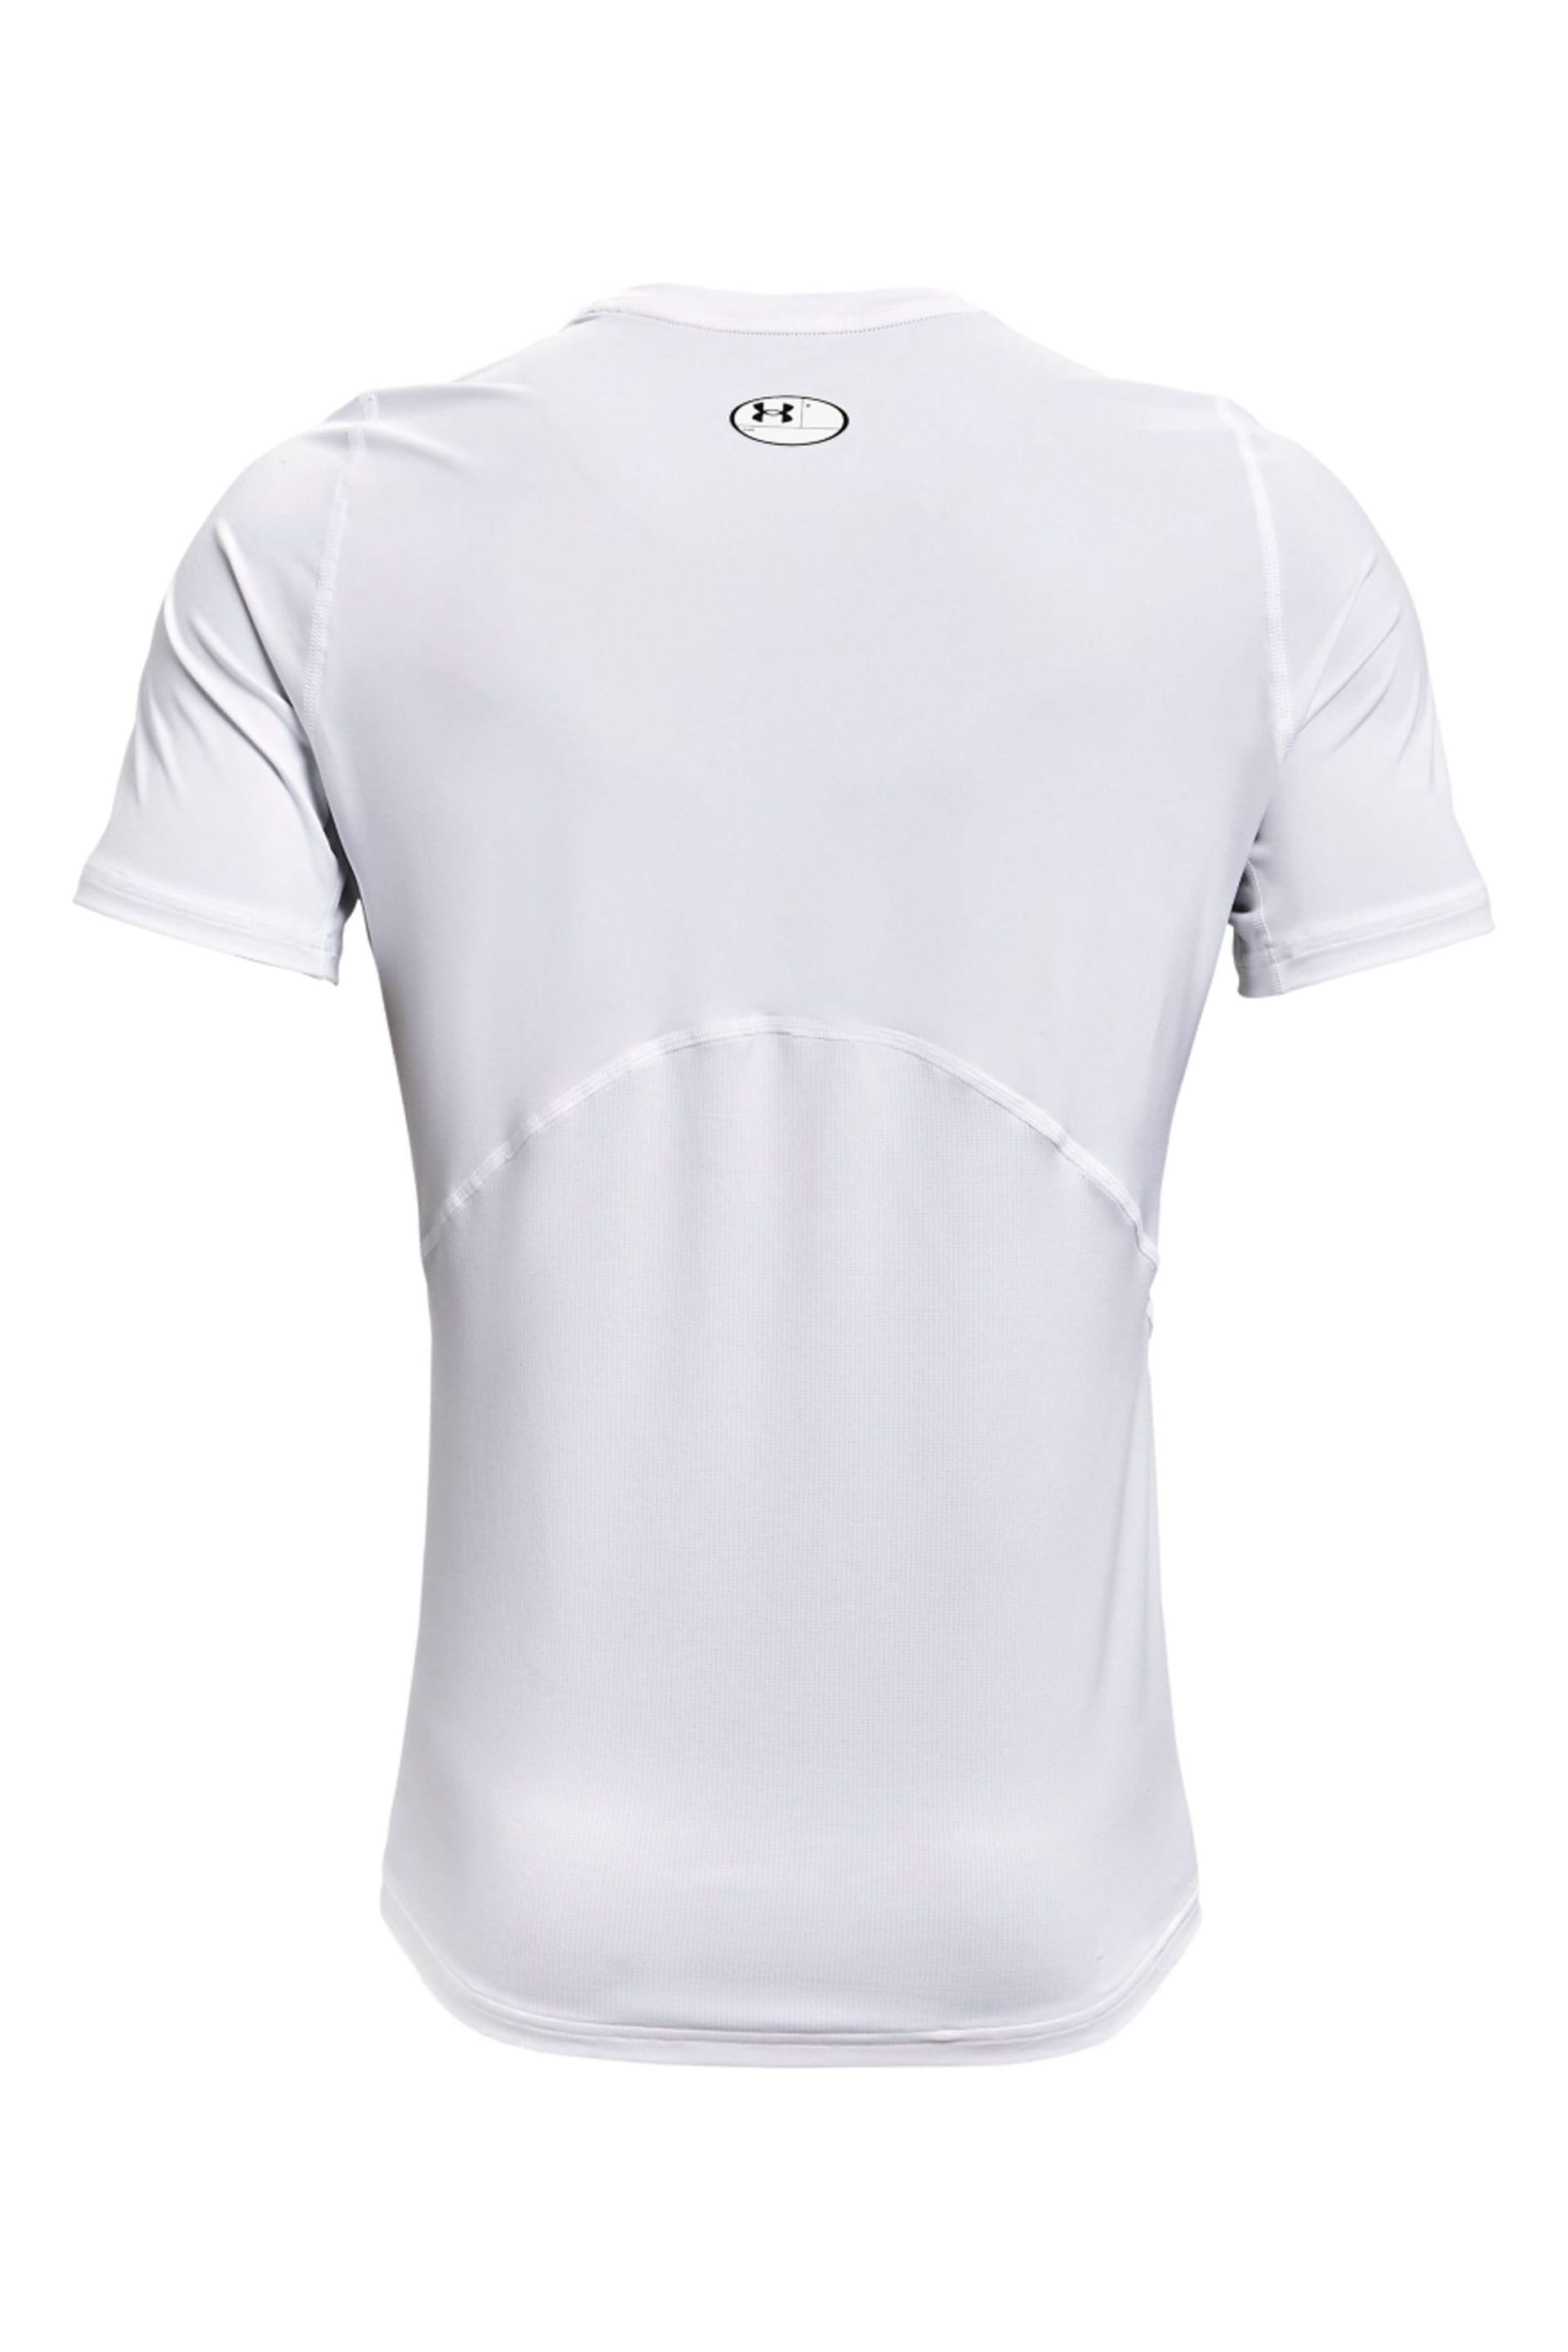 Under Armour White Heat Gear Fitted T-Shirt - Image 6 of 6